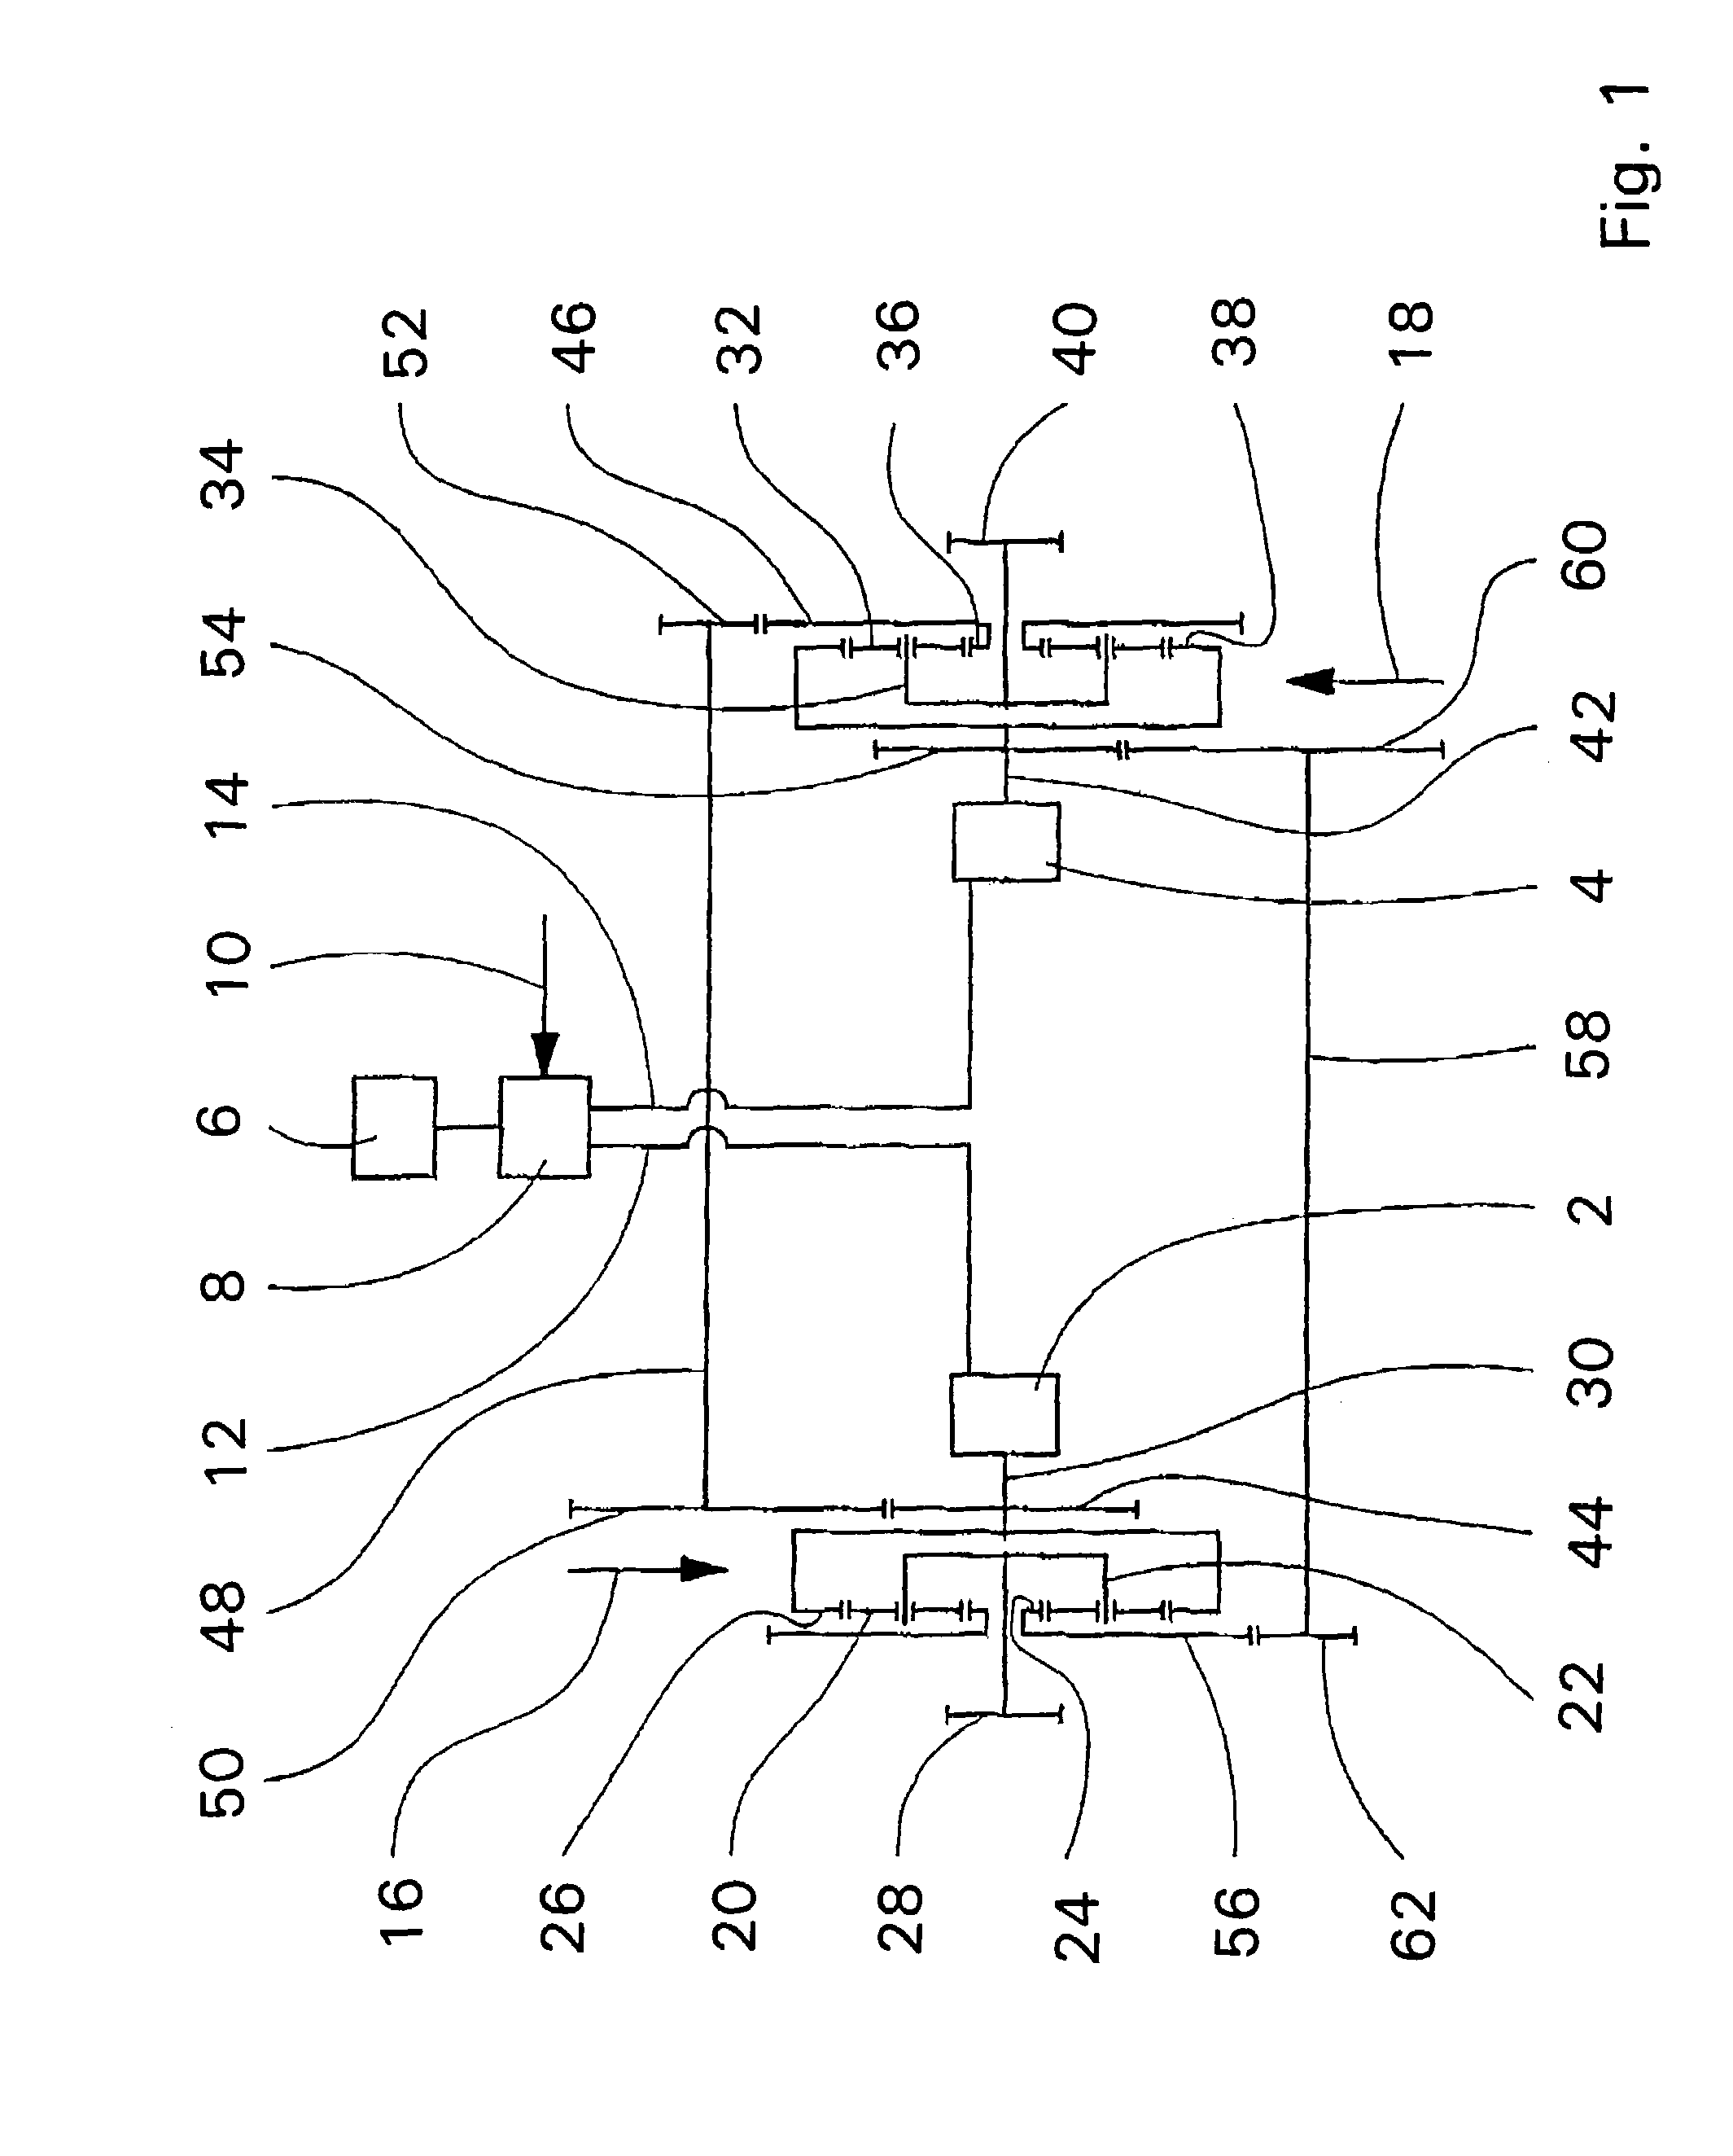 Electrical drive system for a vehicle with skid steering